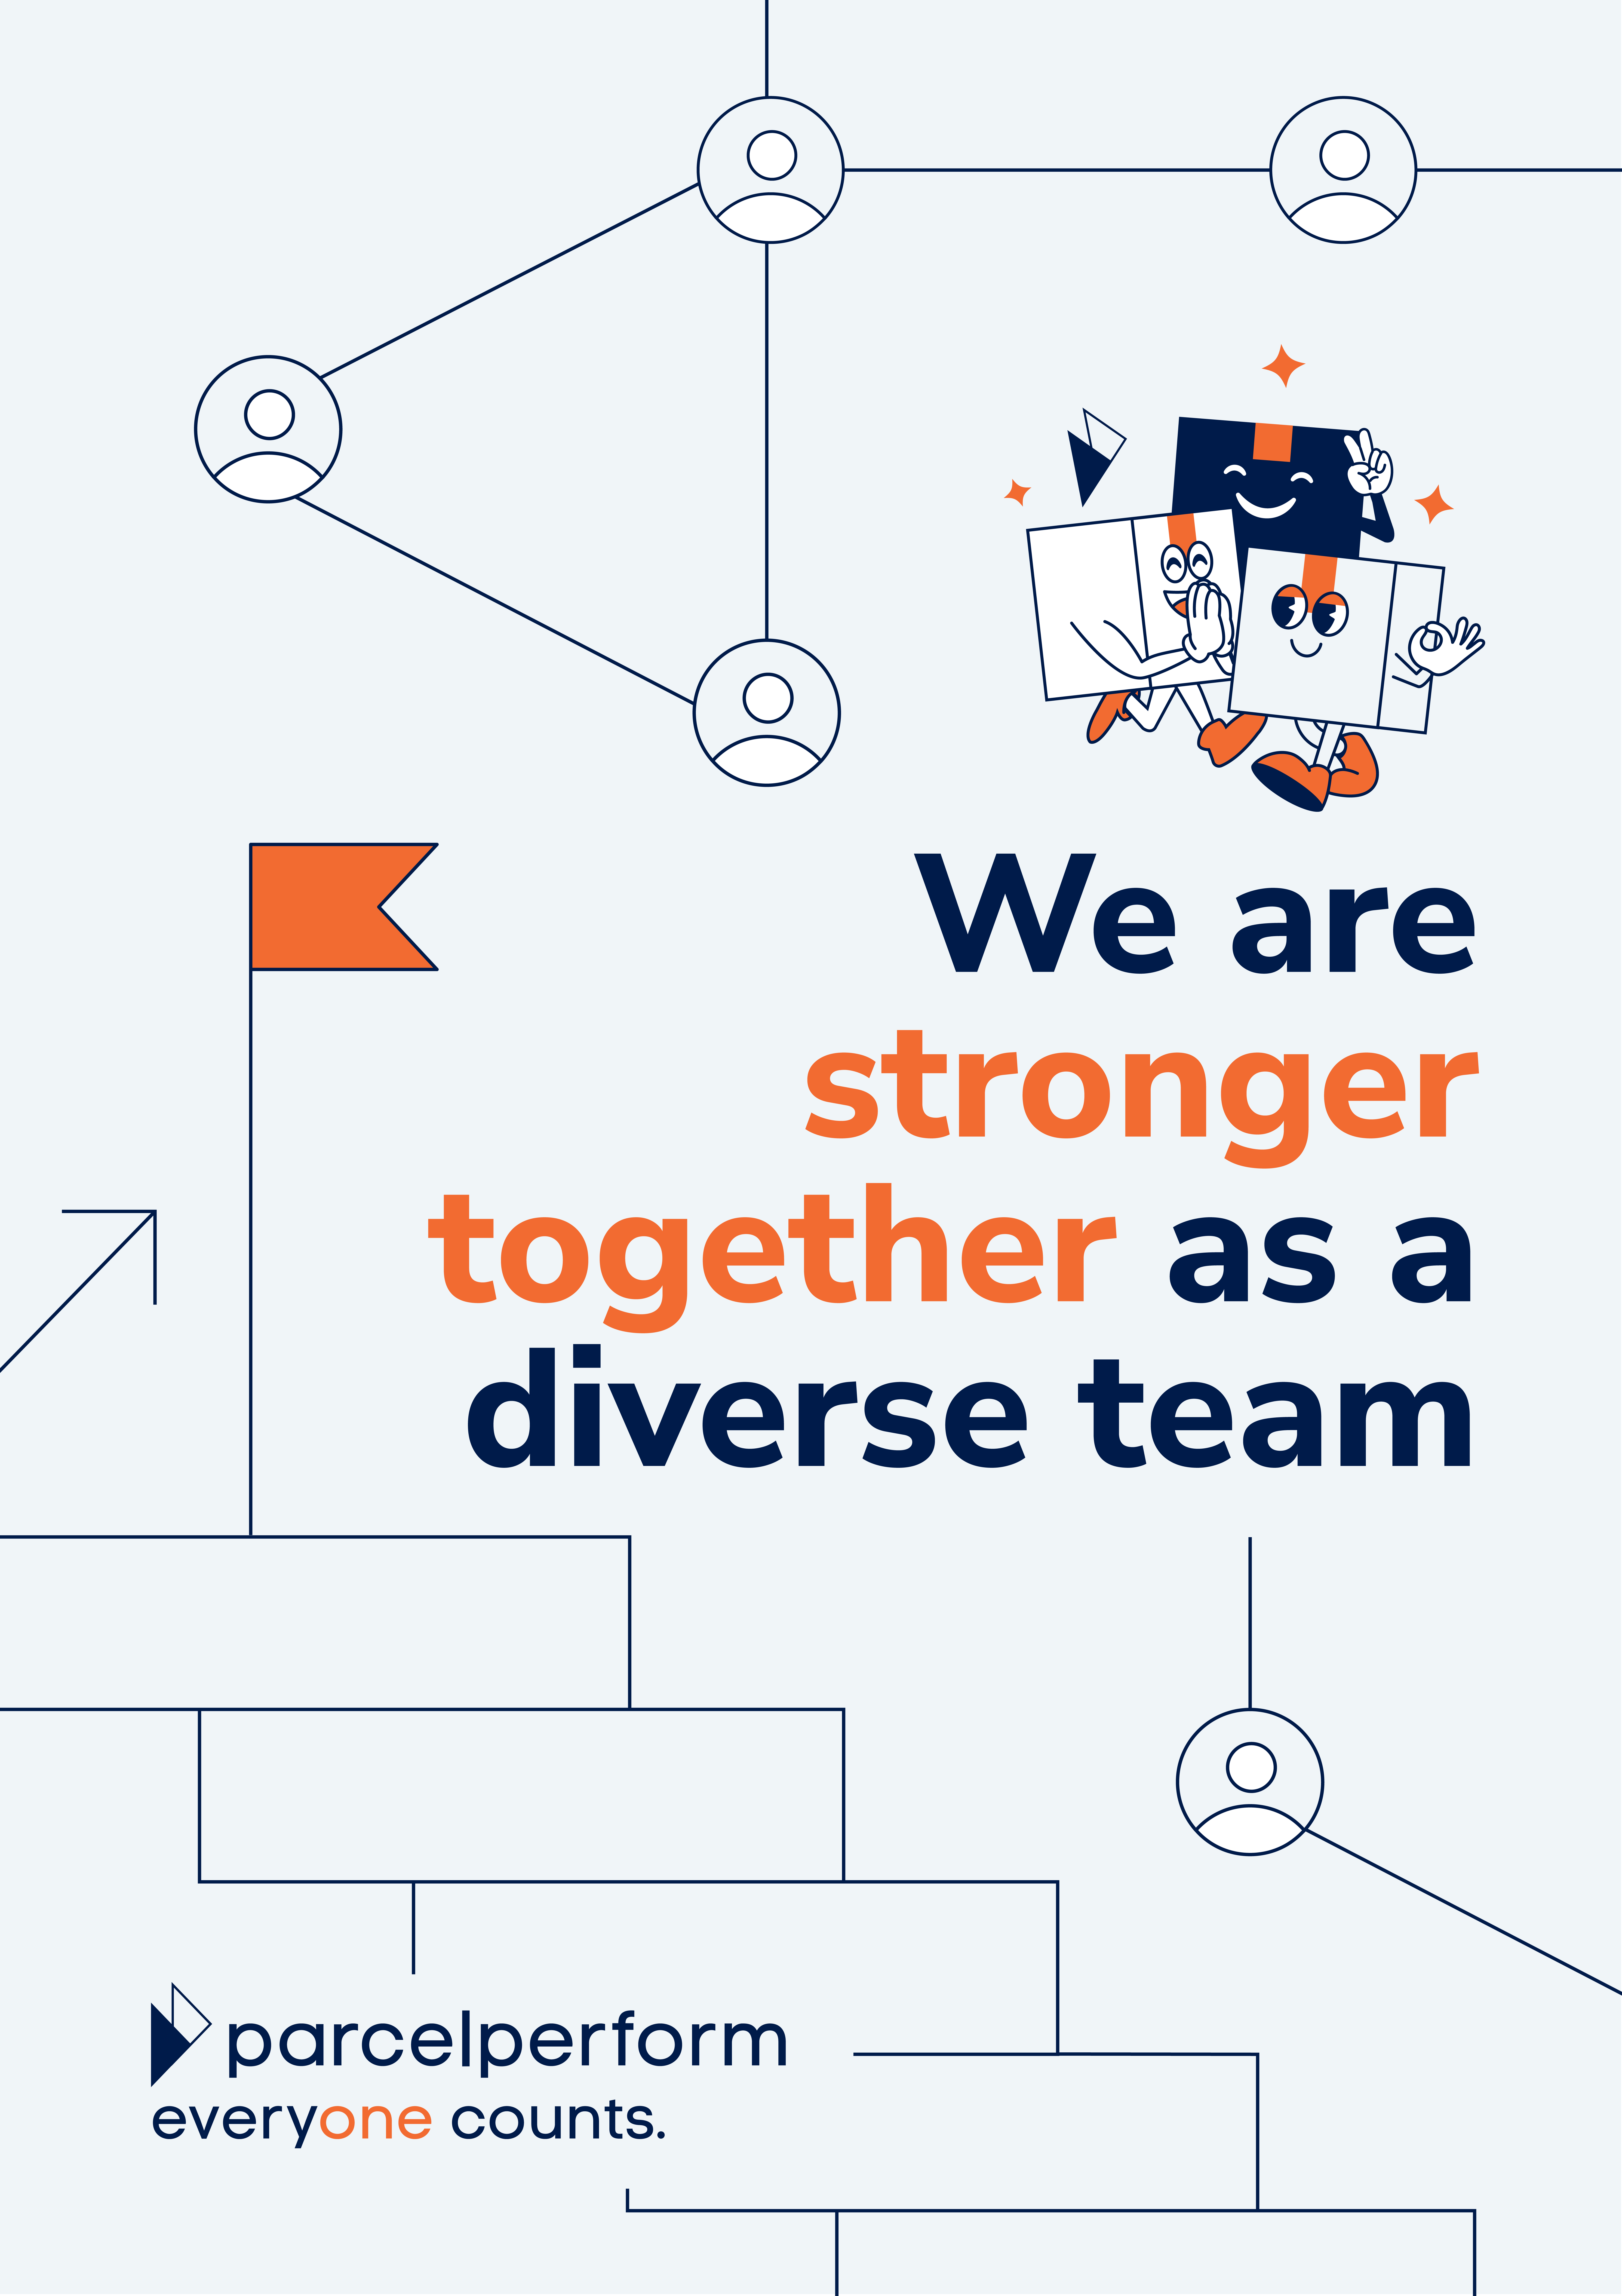 Parcel Perform culture value - We are stronger together as a diverse team